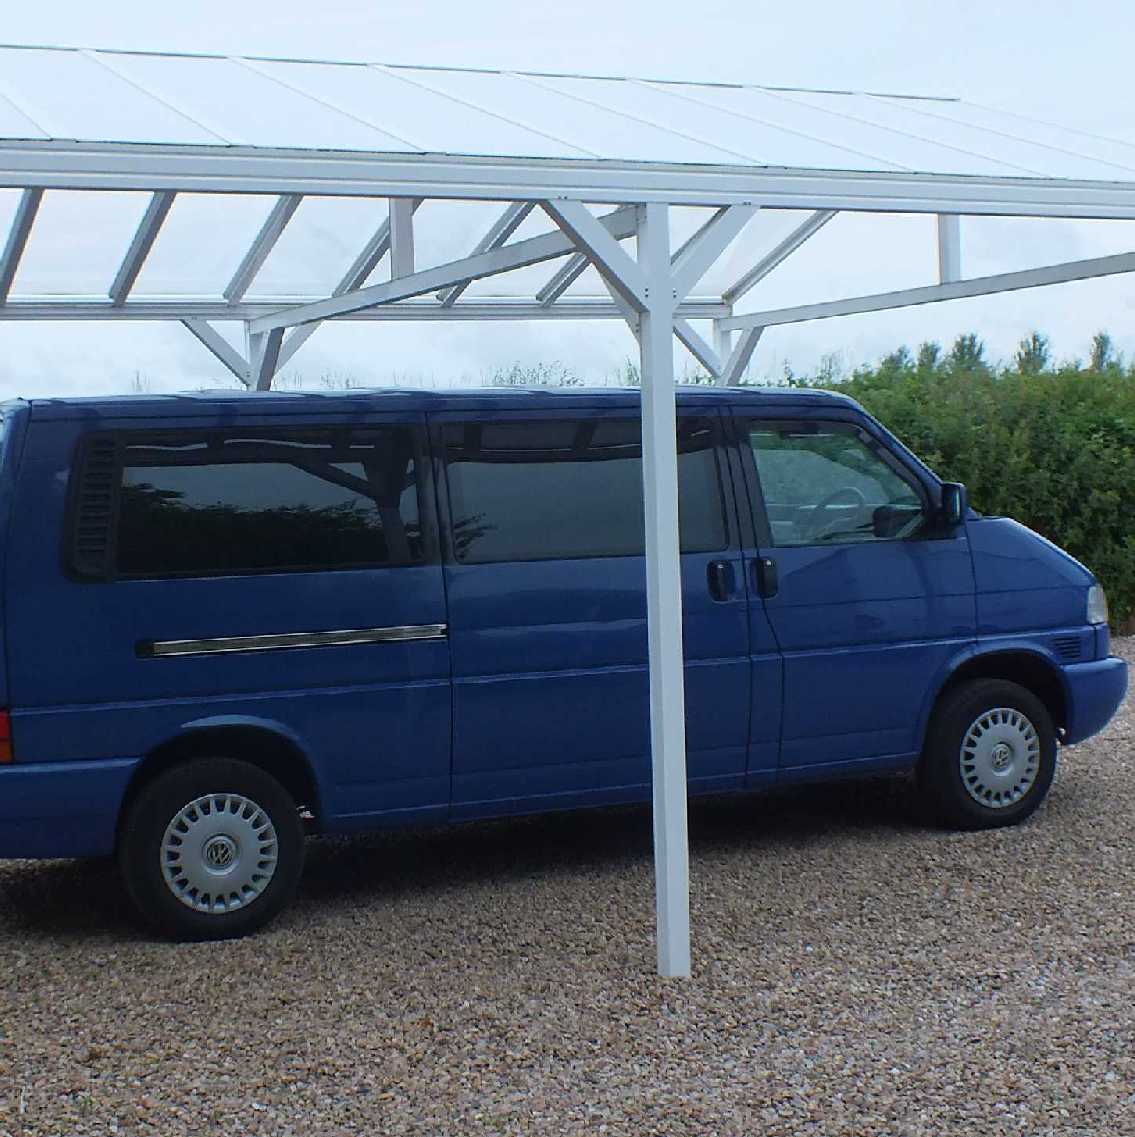 Great deals on Omega Smart Free-Standing, White Gable-Roof (type 1) Canopy with 16mm Polycarbonate Glazing - 6.3m (W) x 3.5m (P), (8) Supporting Posts